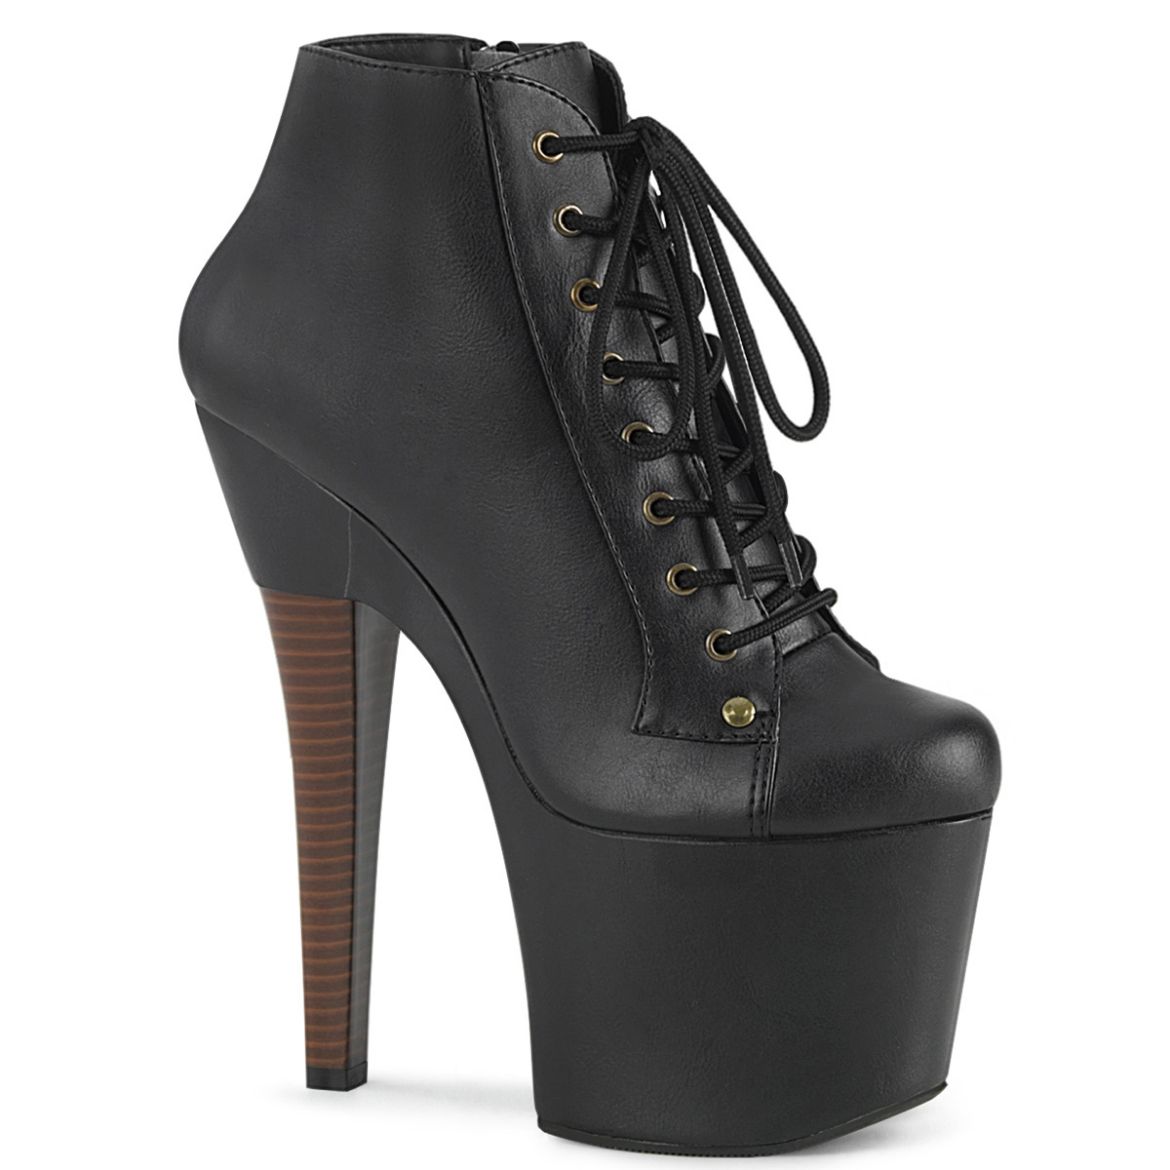 Product image of Pleaser RADIANT-1005 Black Faux Leather/Black Faux Leather 7 inch (17.8 cm) Heel 3 1/4 inch (8.3 cm) Platform Lace-Up Front Ankle Bootie Inside Zip